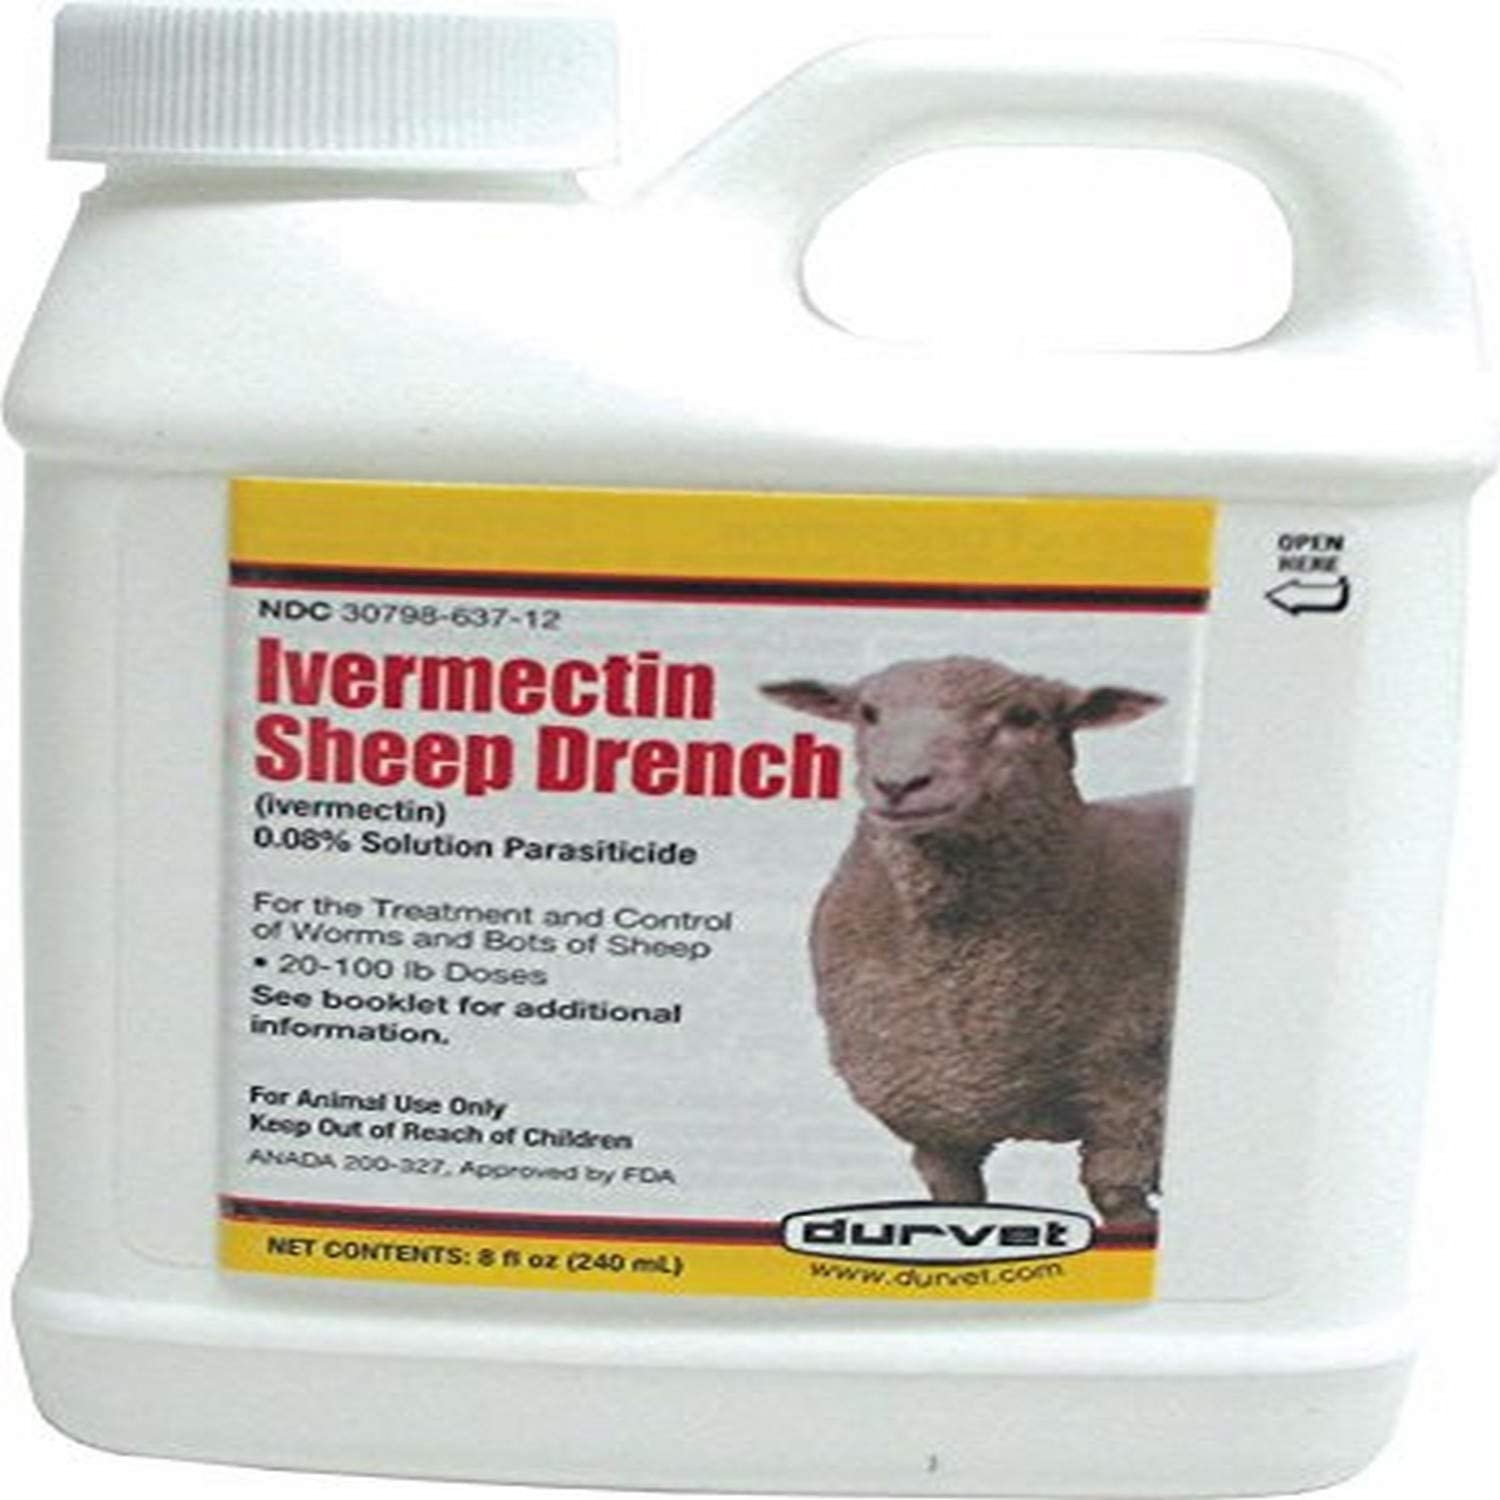 ../../_images/Ivermectin-sheep-drench.jpg